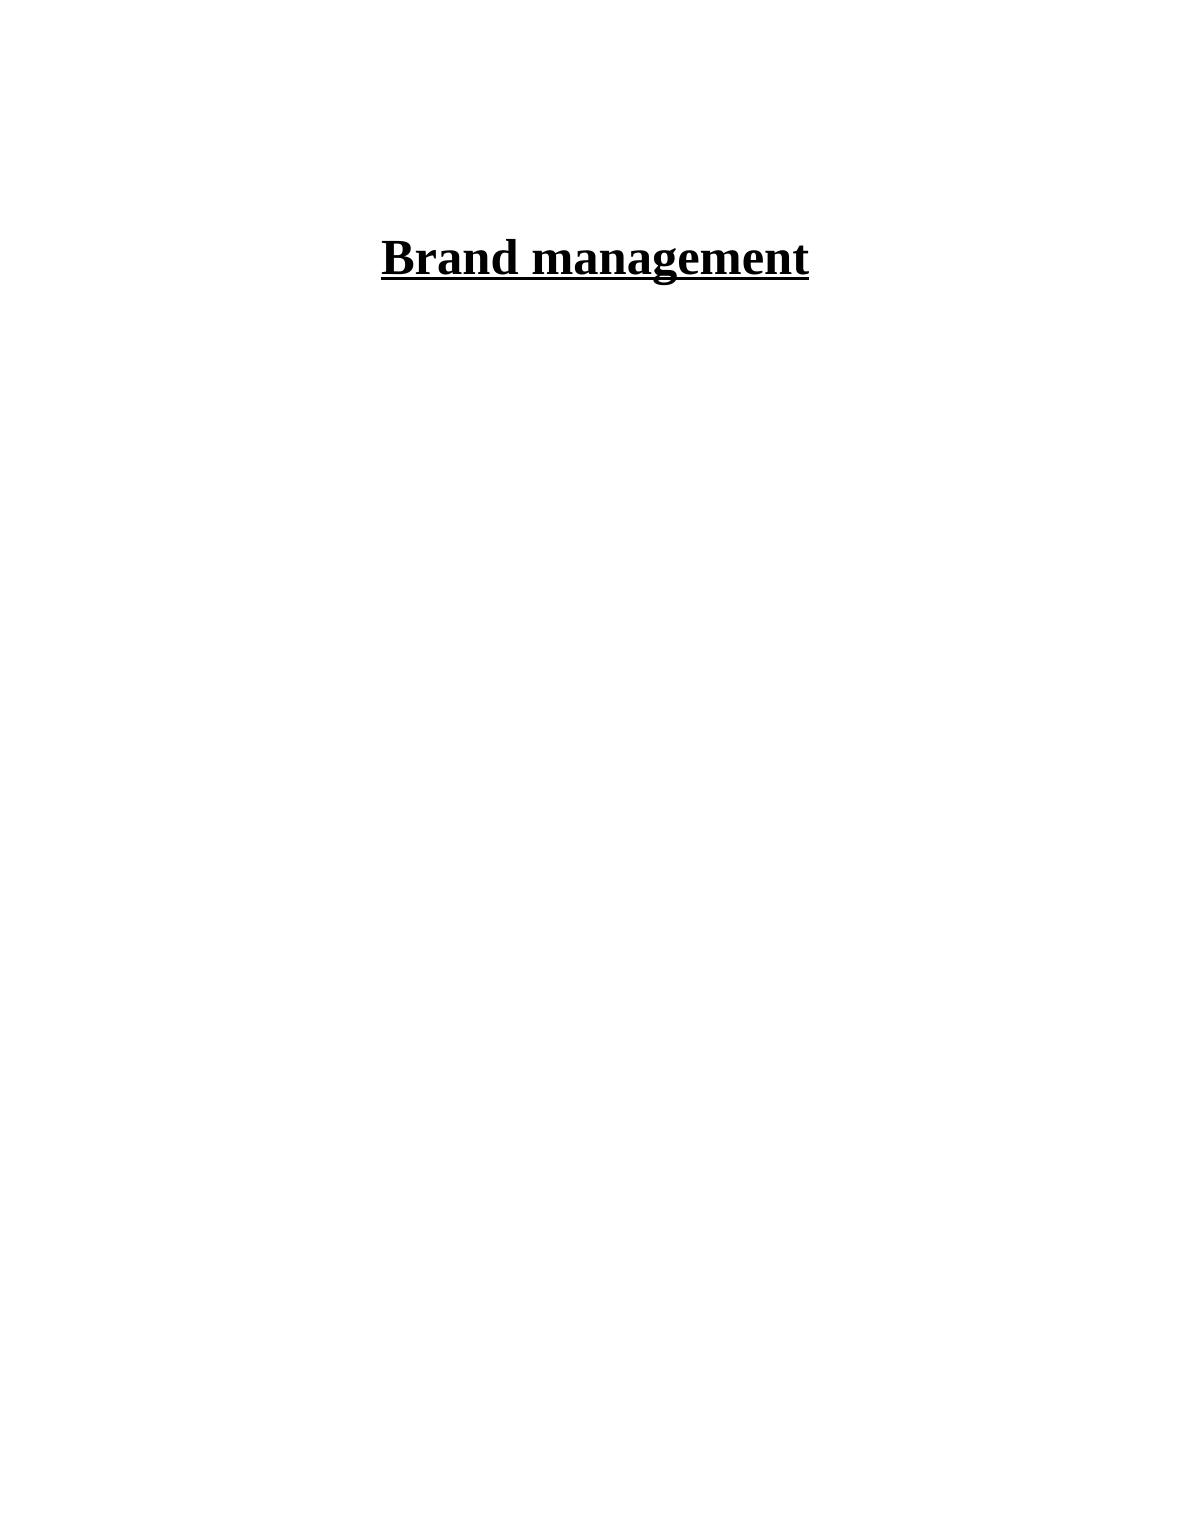 Brand Management: Importance, Strategies, and Hierarchy_1